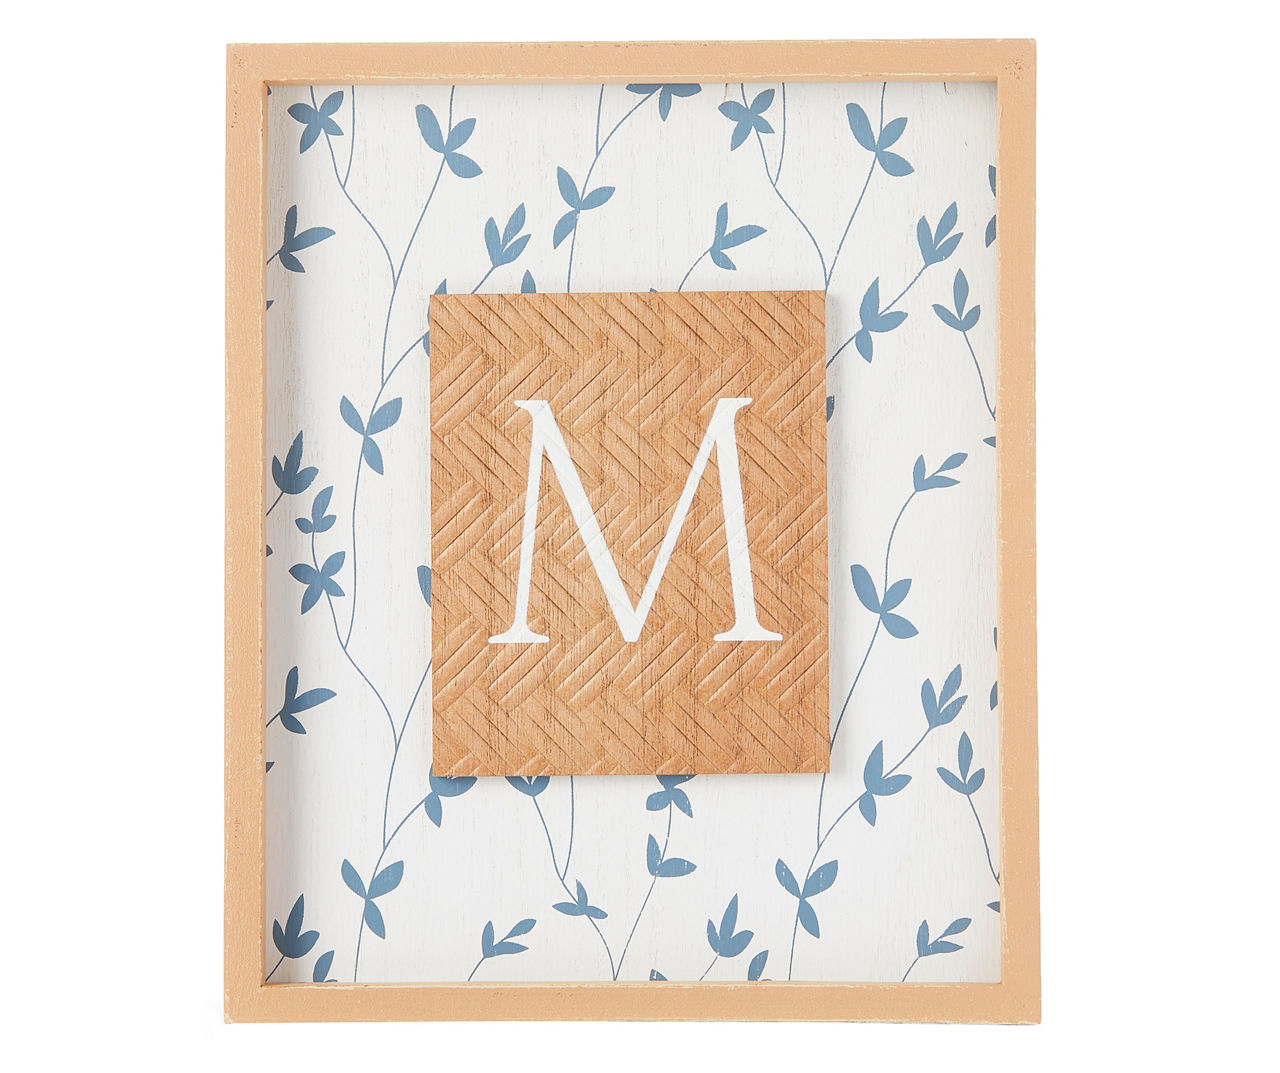 "M" White, Brown & Blue Floral Tabletop Plaque With Easel